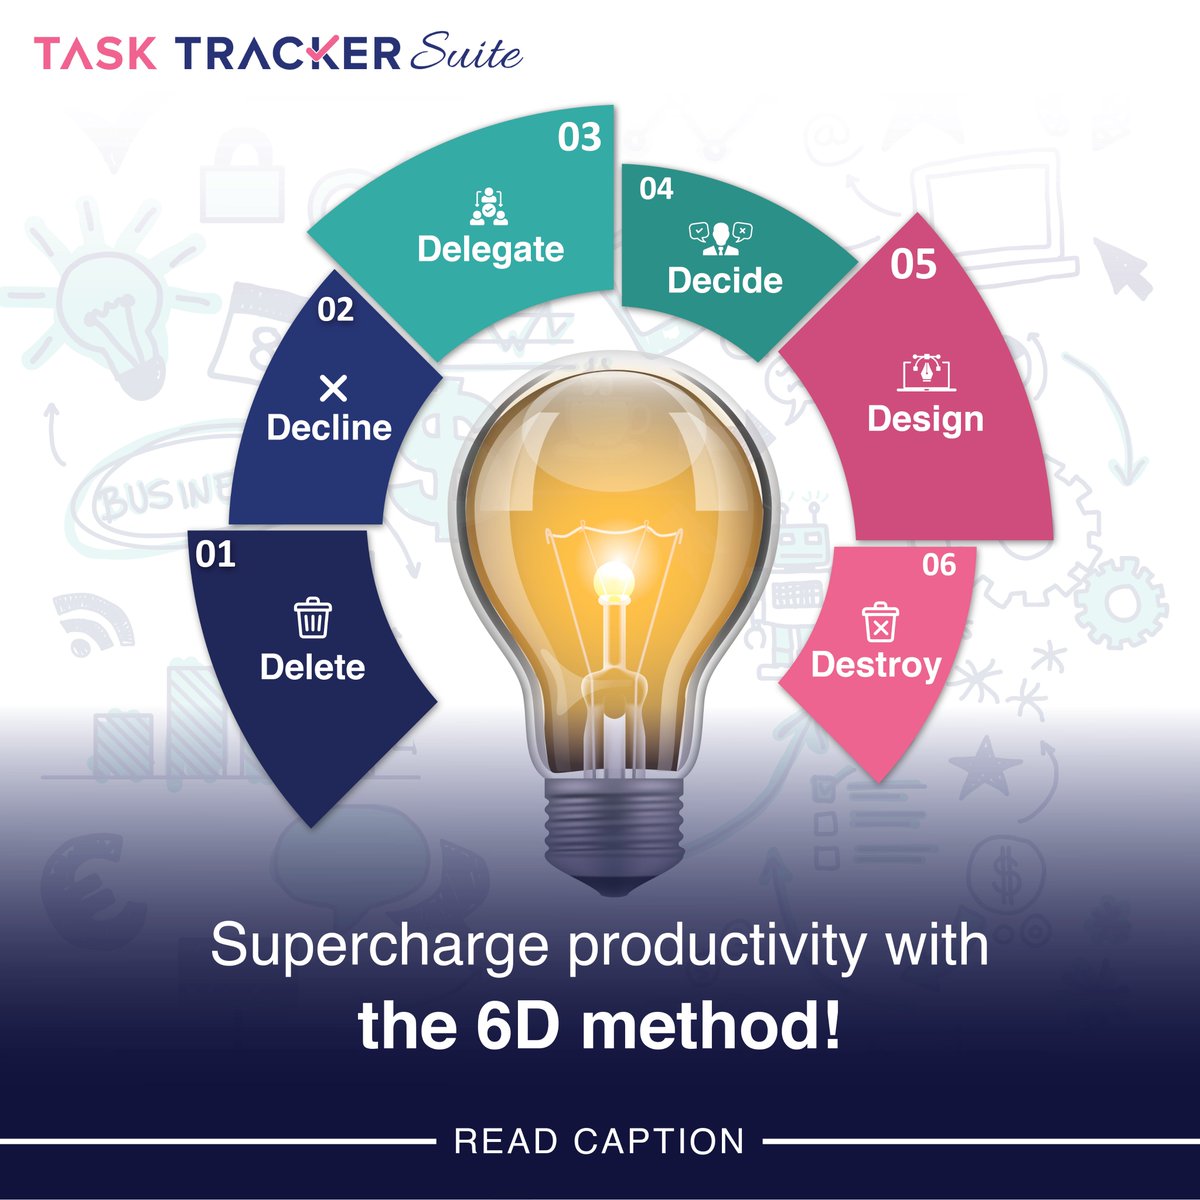 'How to use the 6 D method to prioritise tasks and boost productivity?

* Delete
* Decline
* Delegate
* Decide
* Design
* Destroy

Follow for more such tips!'

#tasktracker #taskmanagementtools #freetaskmanagementtools #timesheet #timetracker